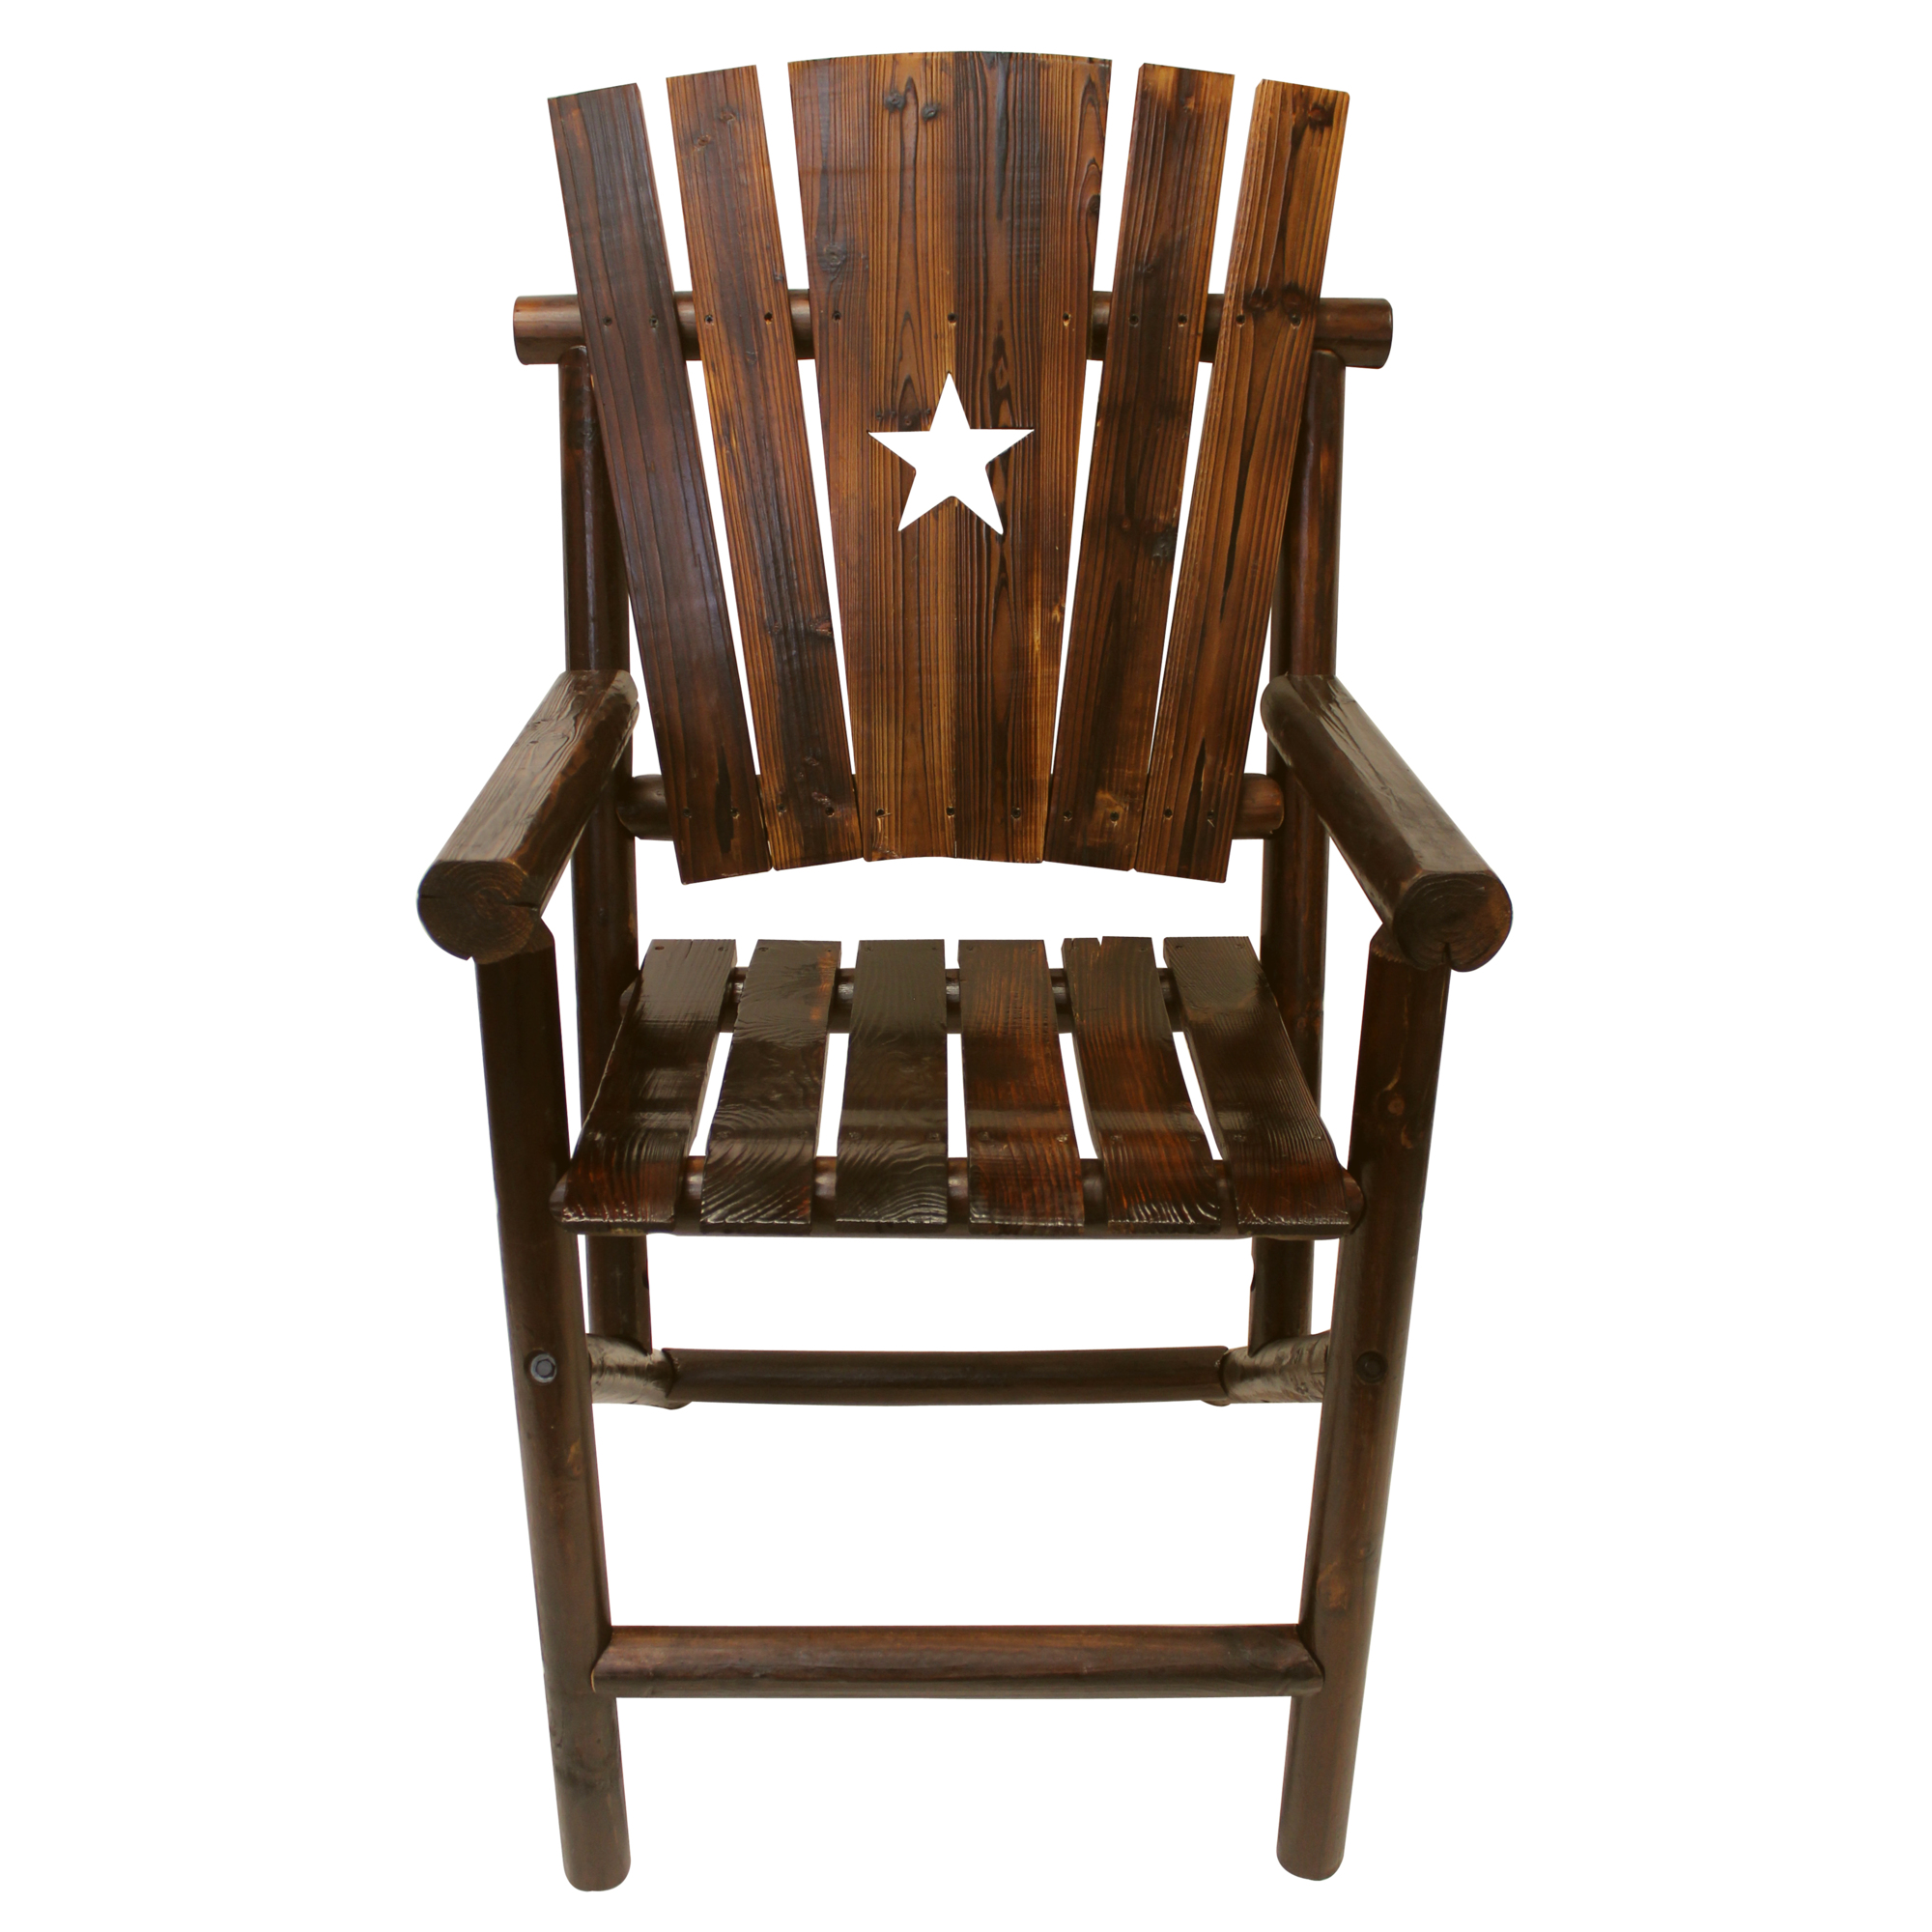 Leigh Country, Char-Log Star Bar Arm Chair, Primary Color Brown, Material Wood, Width 29.52 in, Model TX 93732